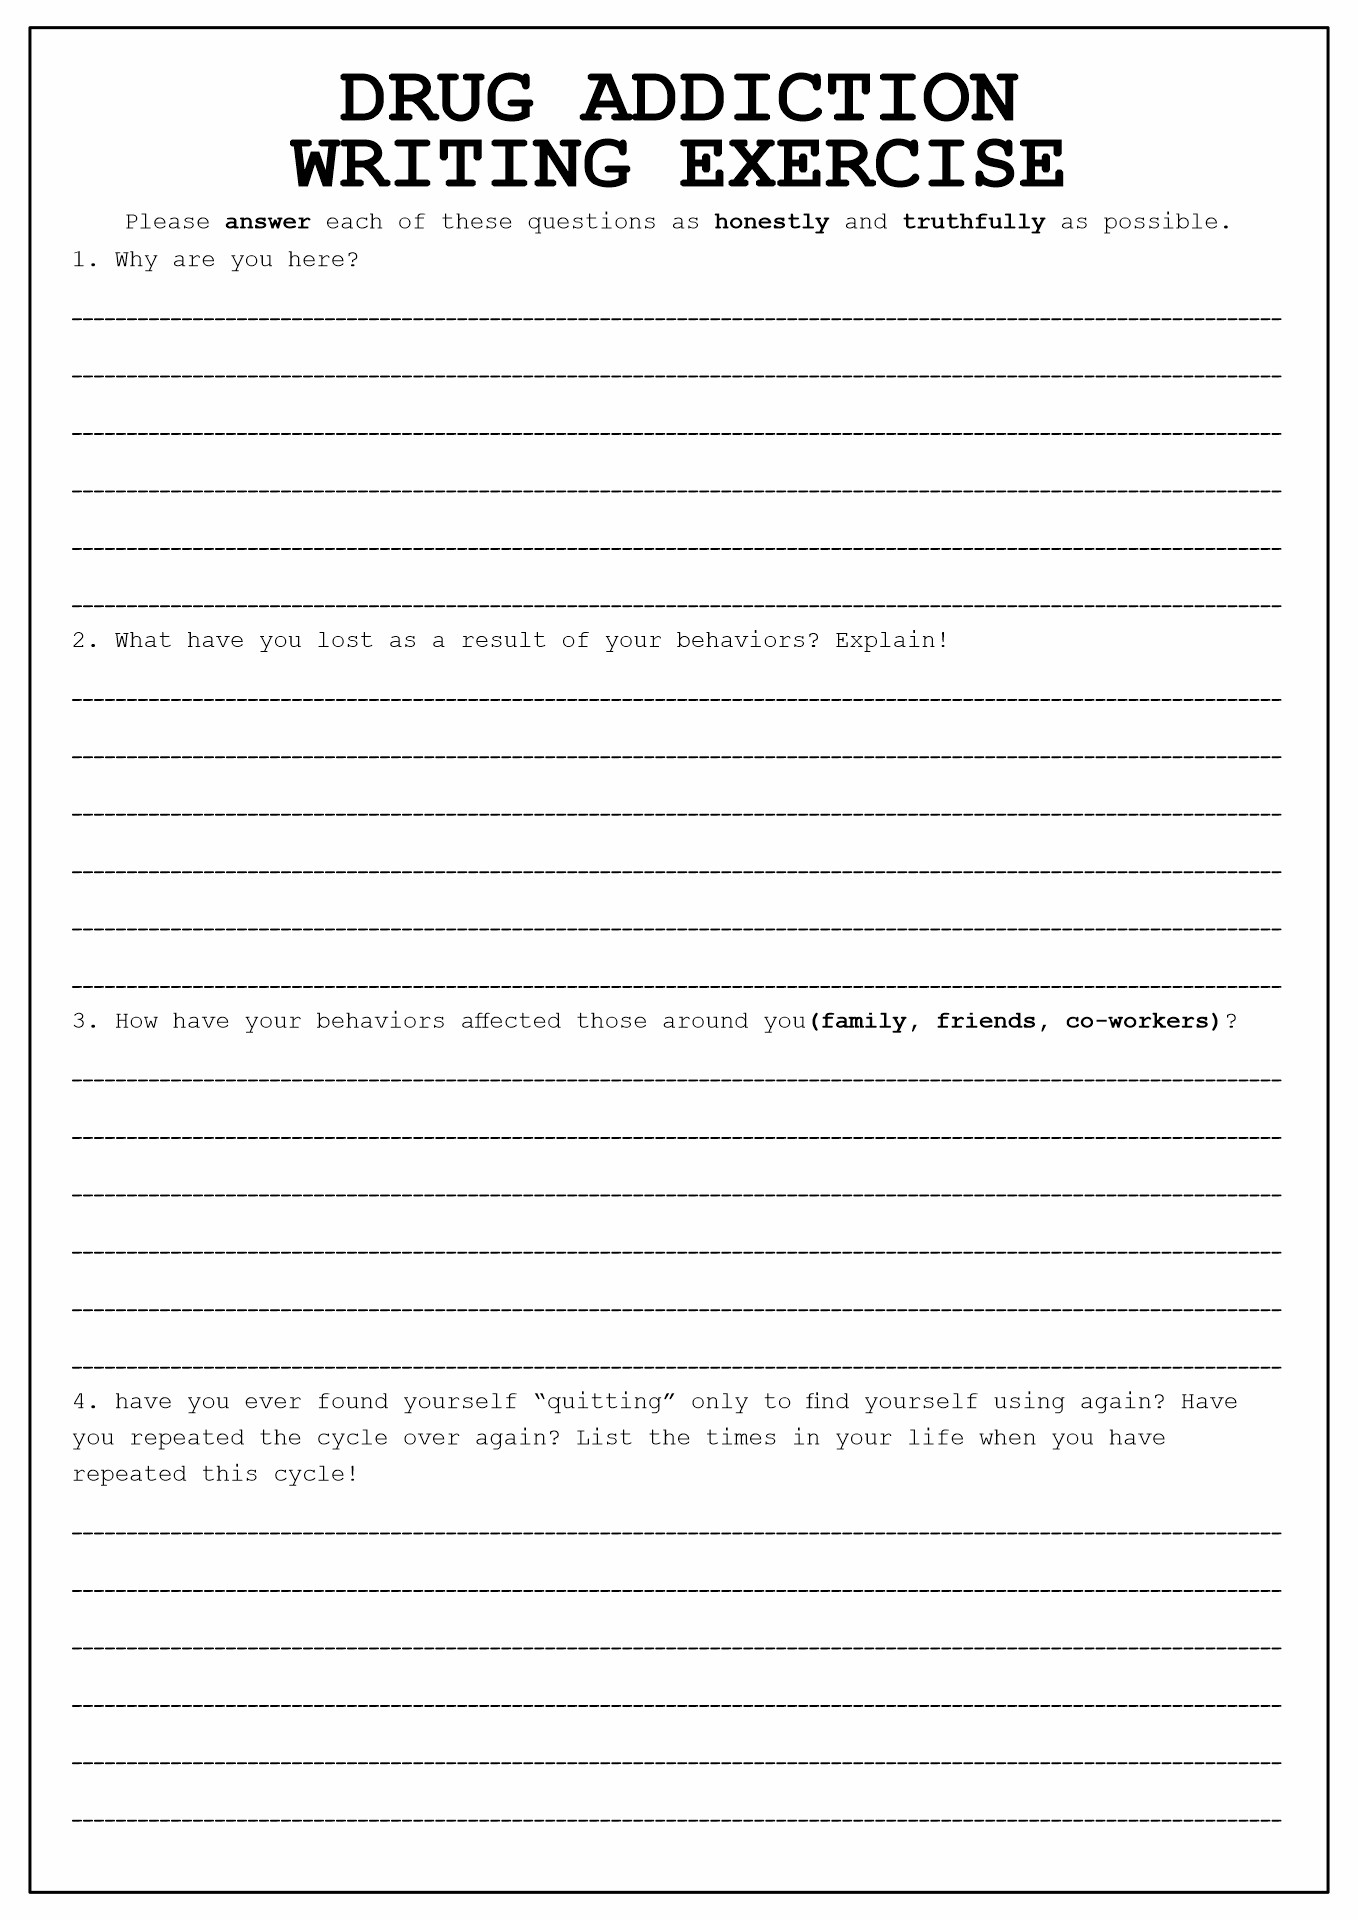 Drug Addiction Recovery Worksheets Image